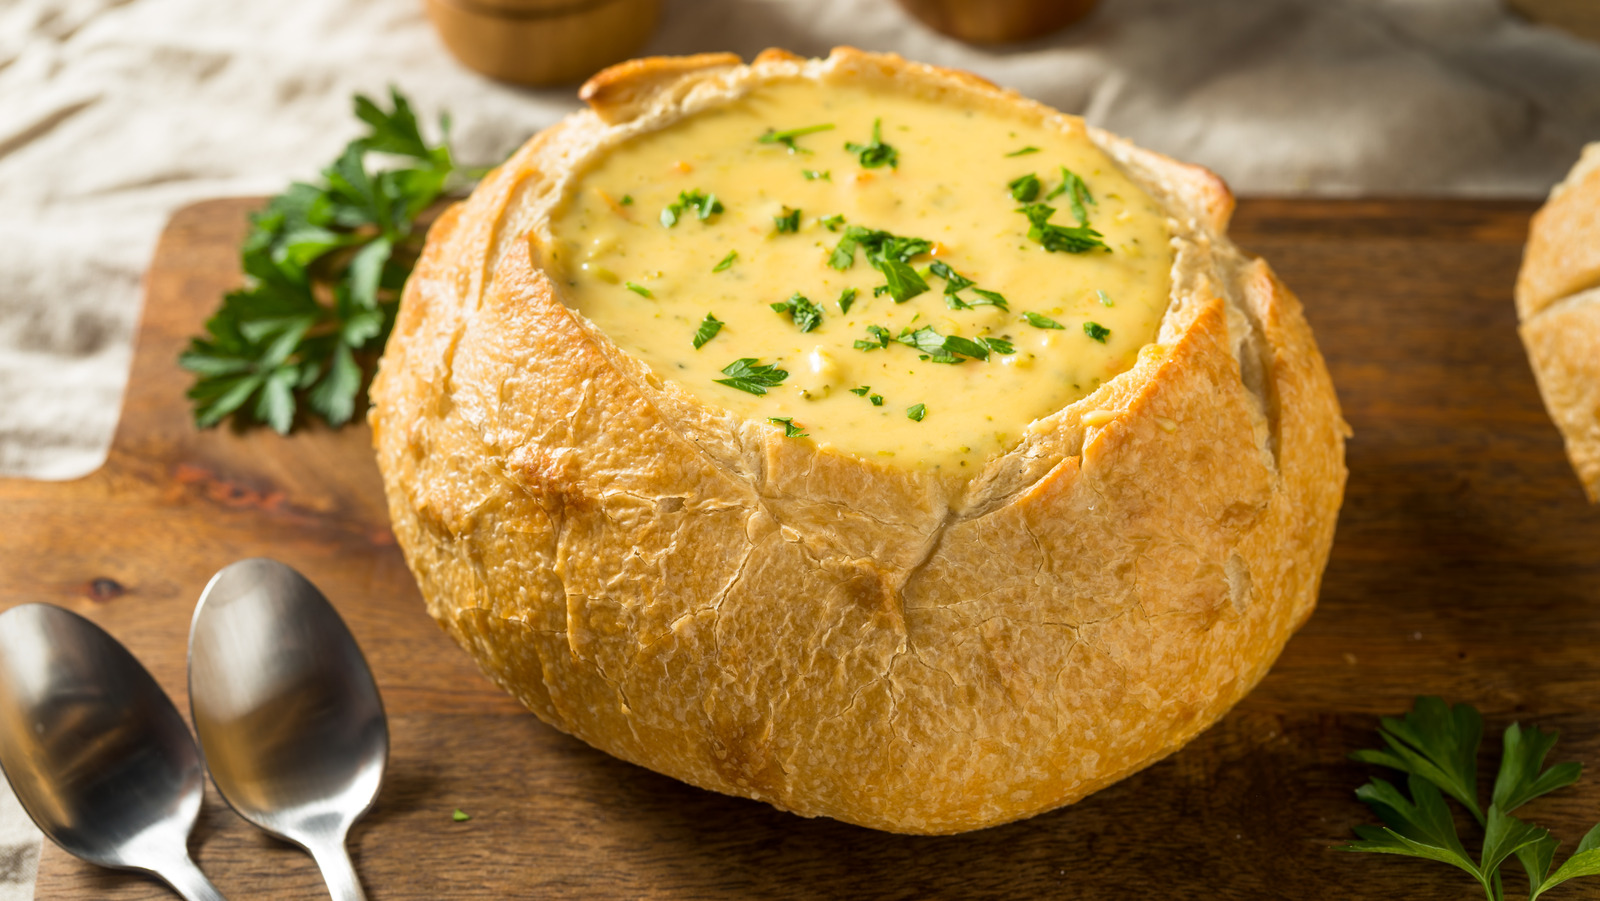 https://www.tastingtable.com/img/gallery/nearly-40-of-people-say-this-is-the-best-soup-at-panera/l-intro-1655839889.jpg